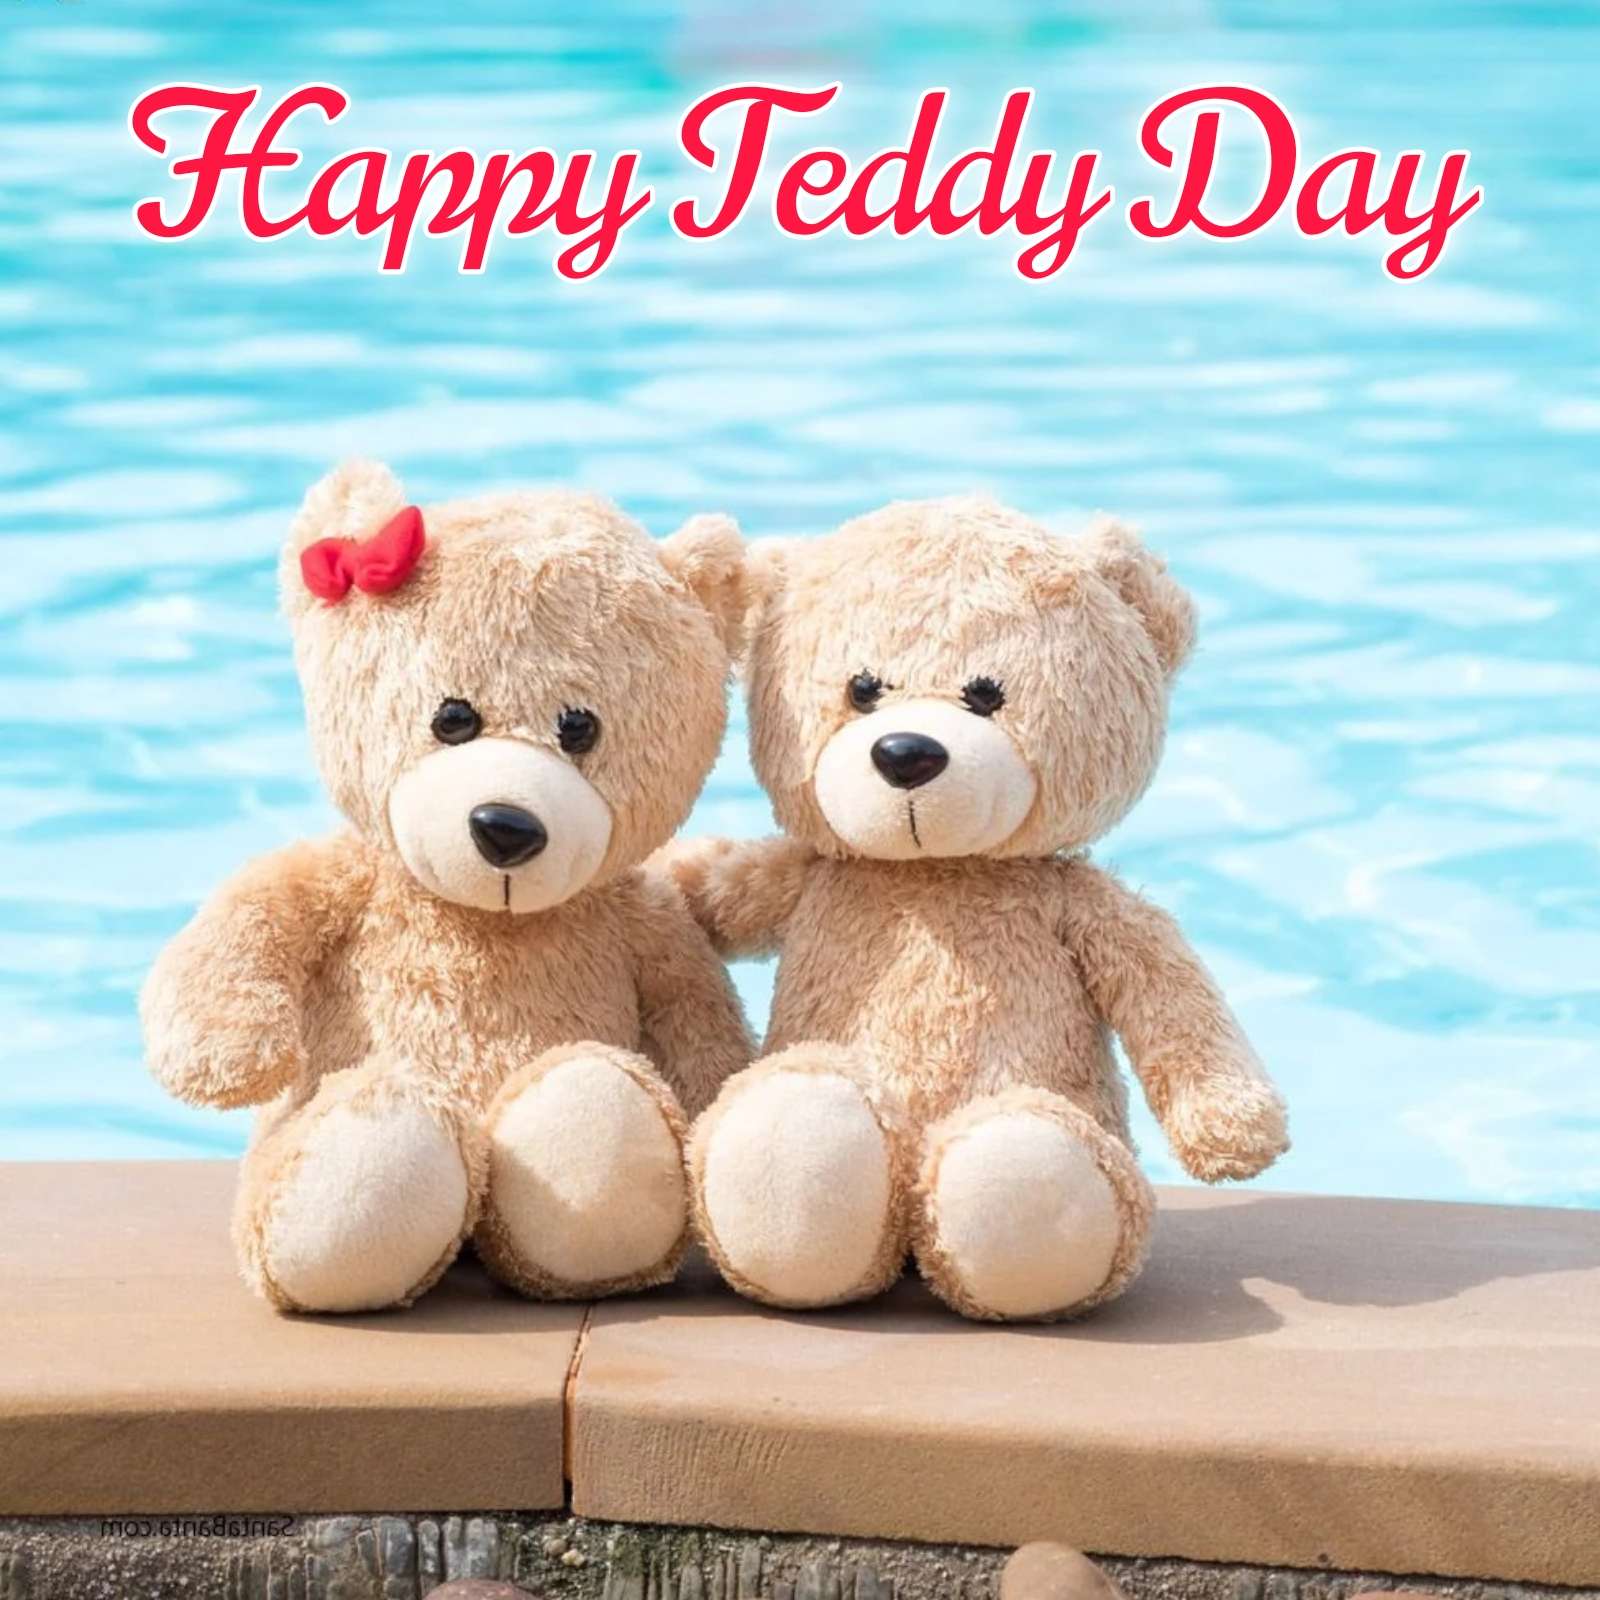 Happy Teddy Day Images Hd Download